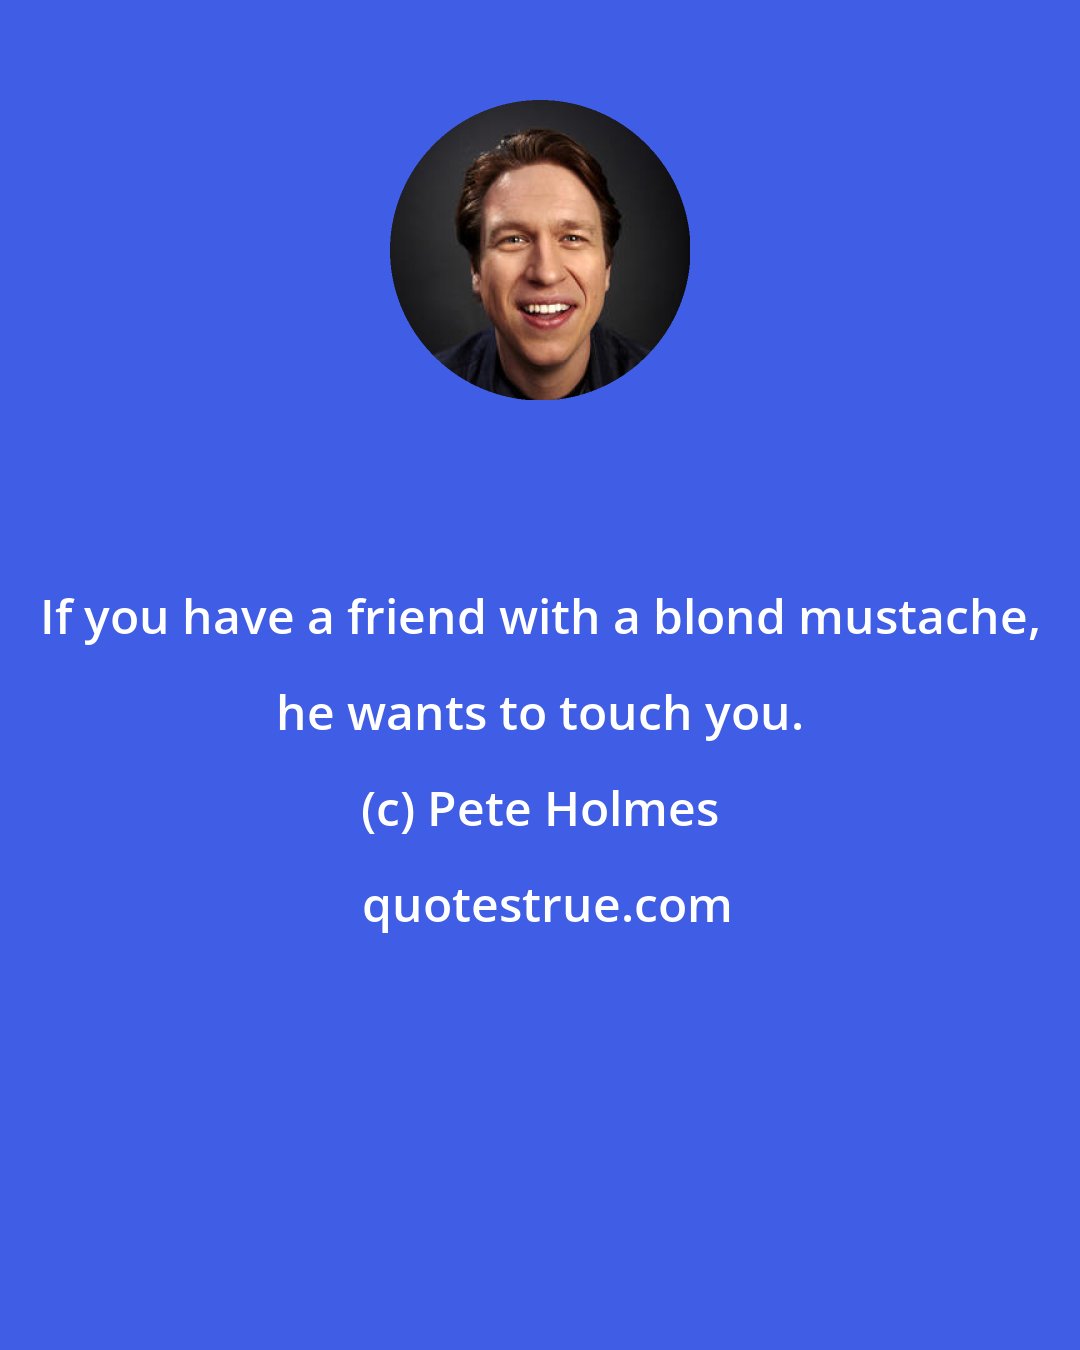 Pete Holmes: If you have a friend with a blond mustache, he wants to touch you.